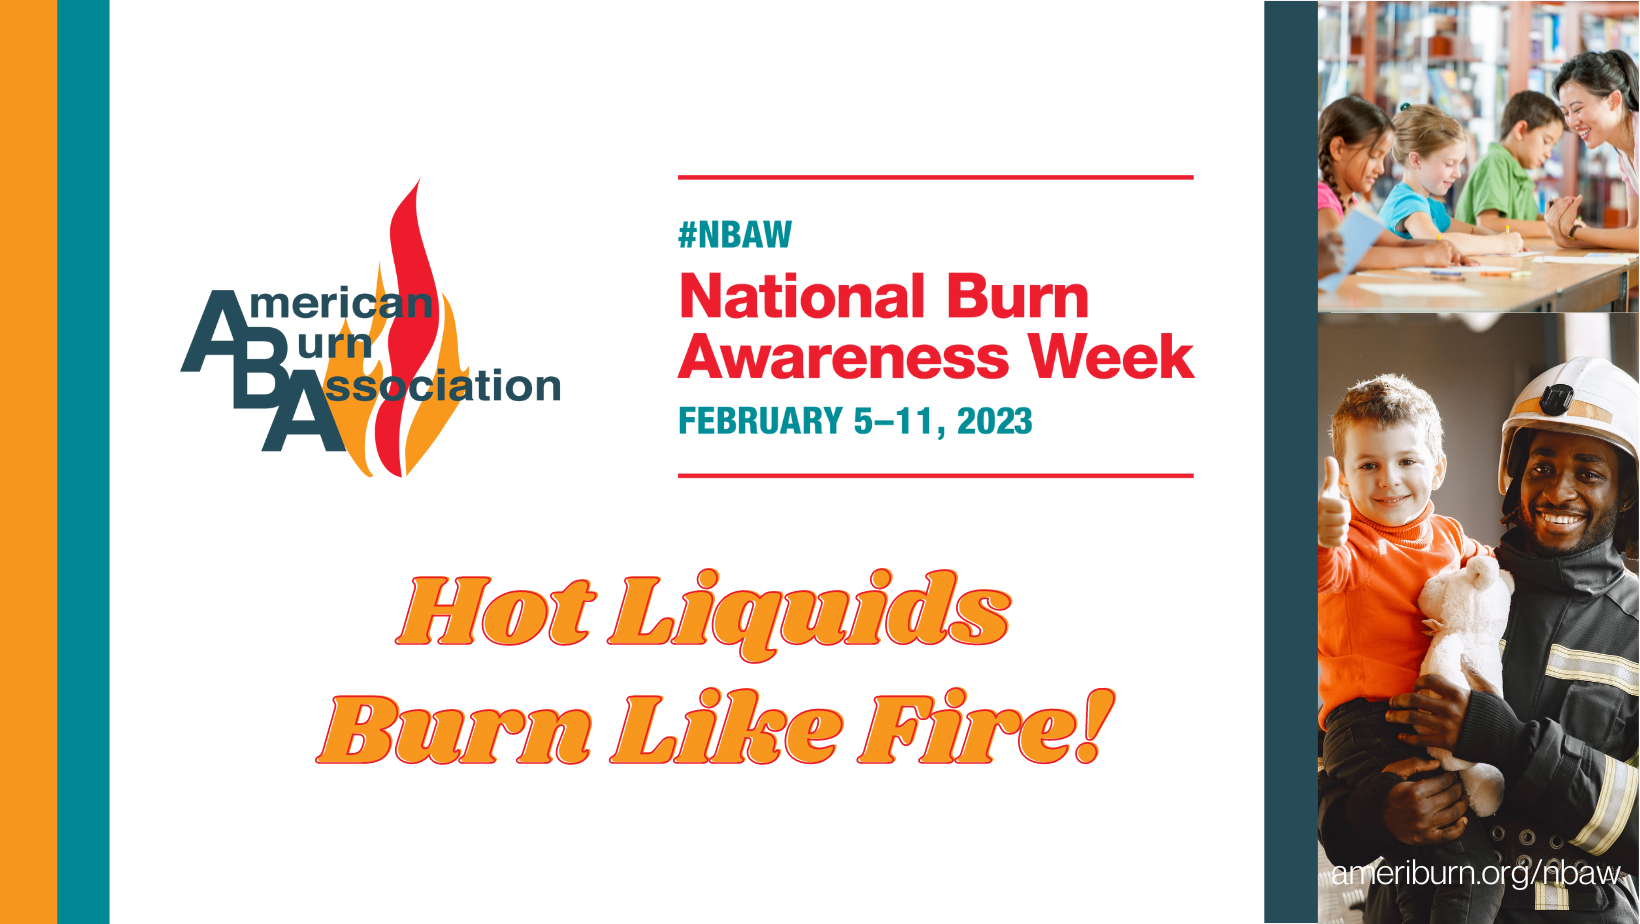 Office of the Essex Fire Marshal wants to remind residents that it is Burn Awareness Week